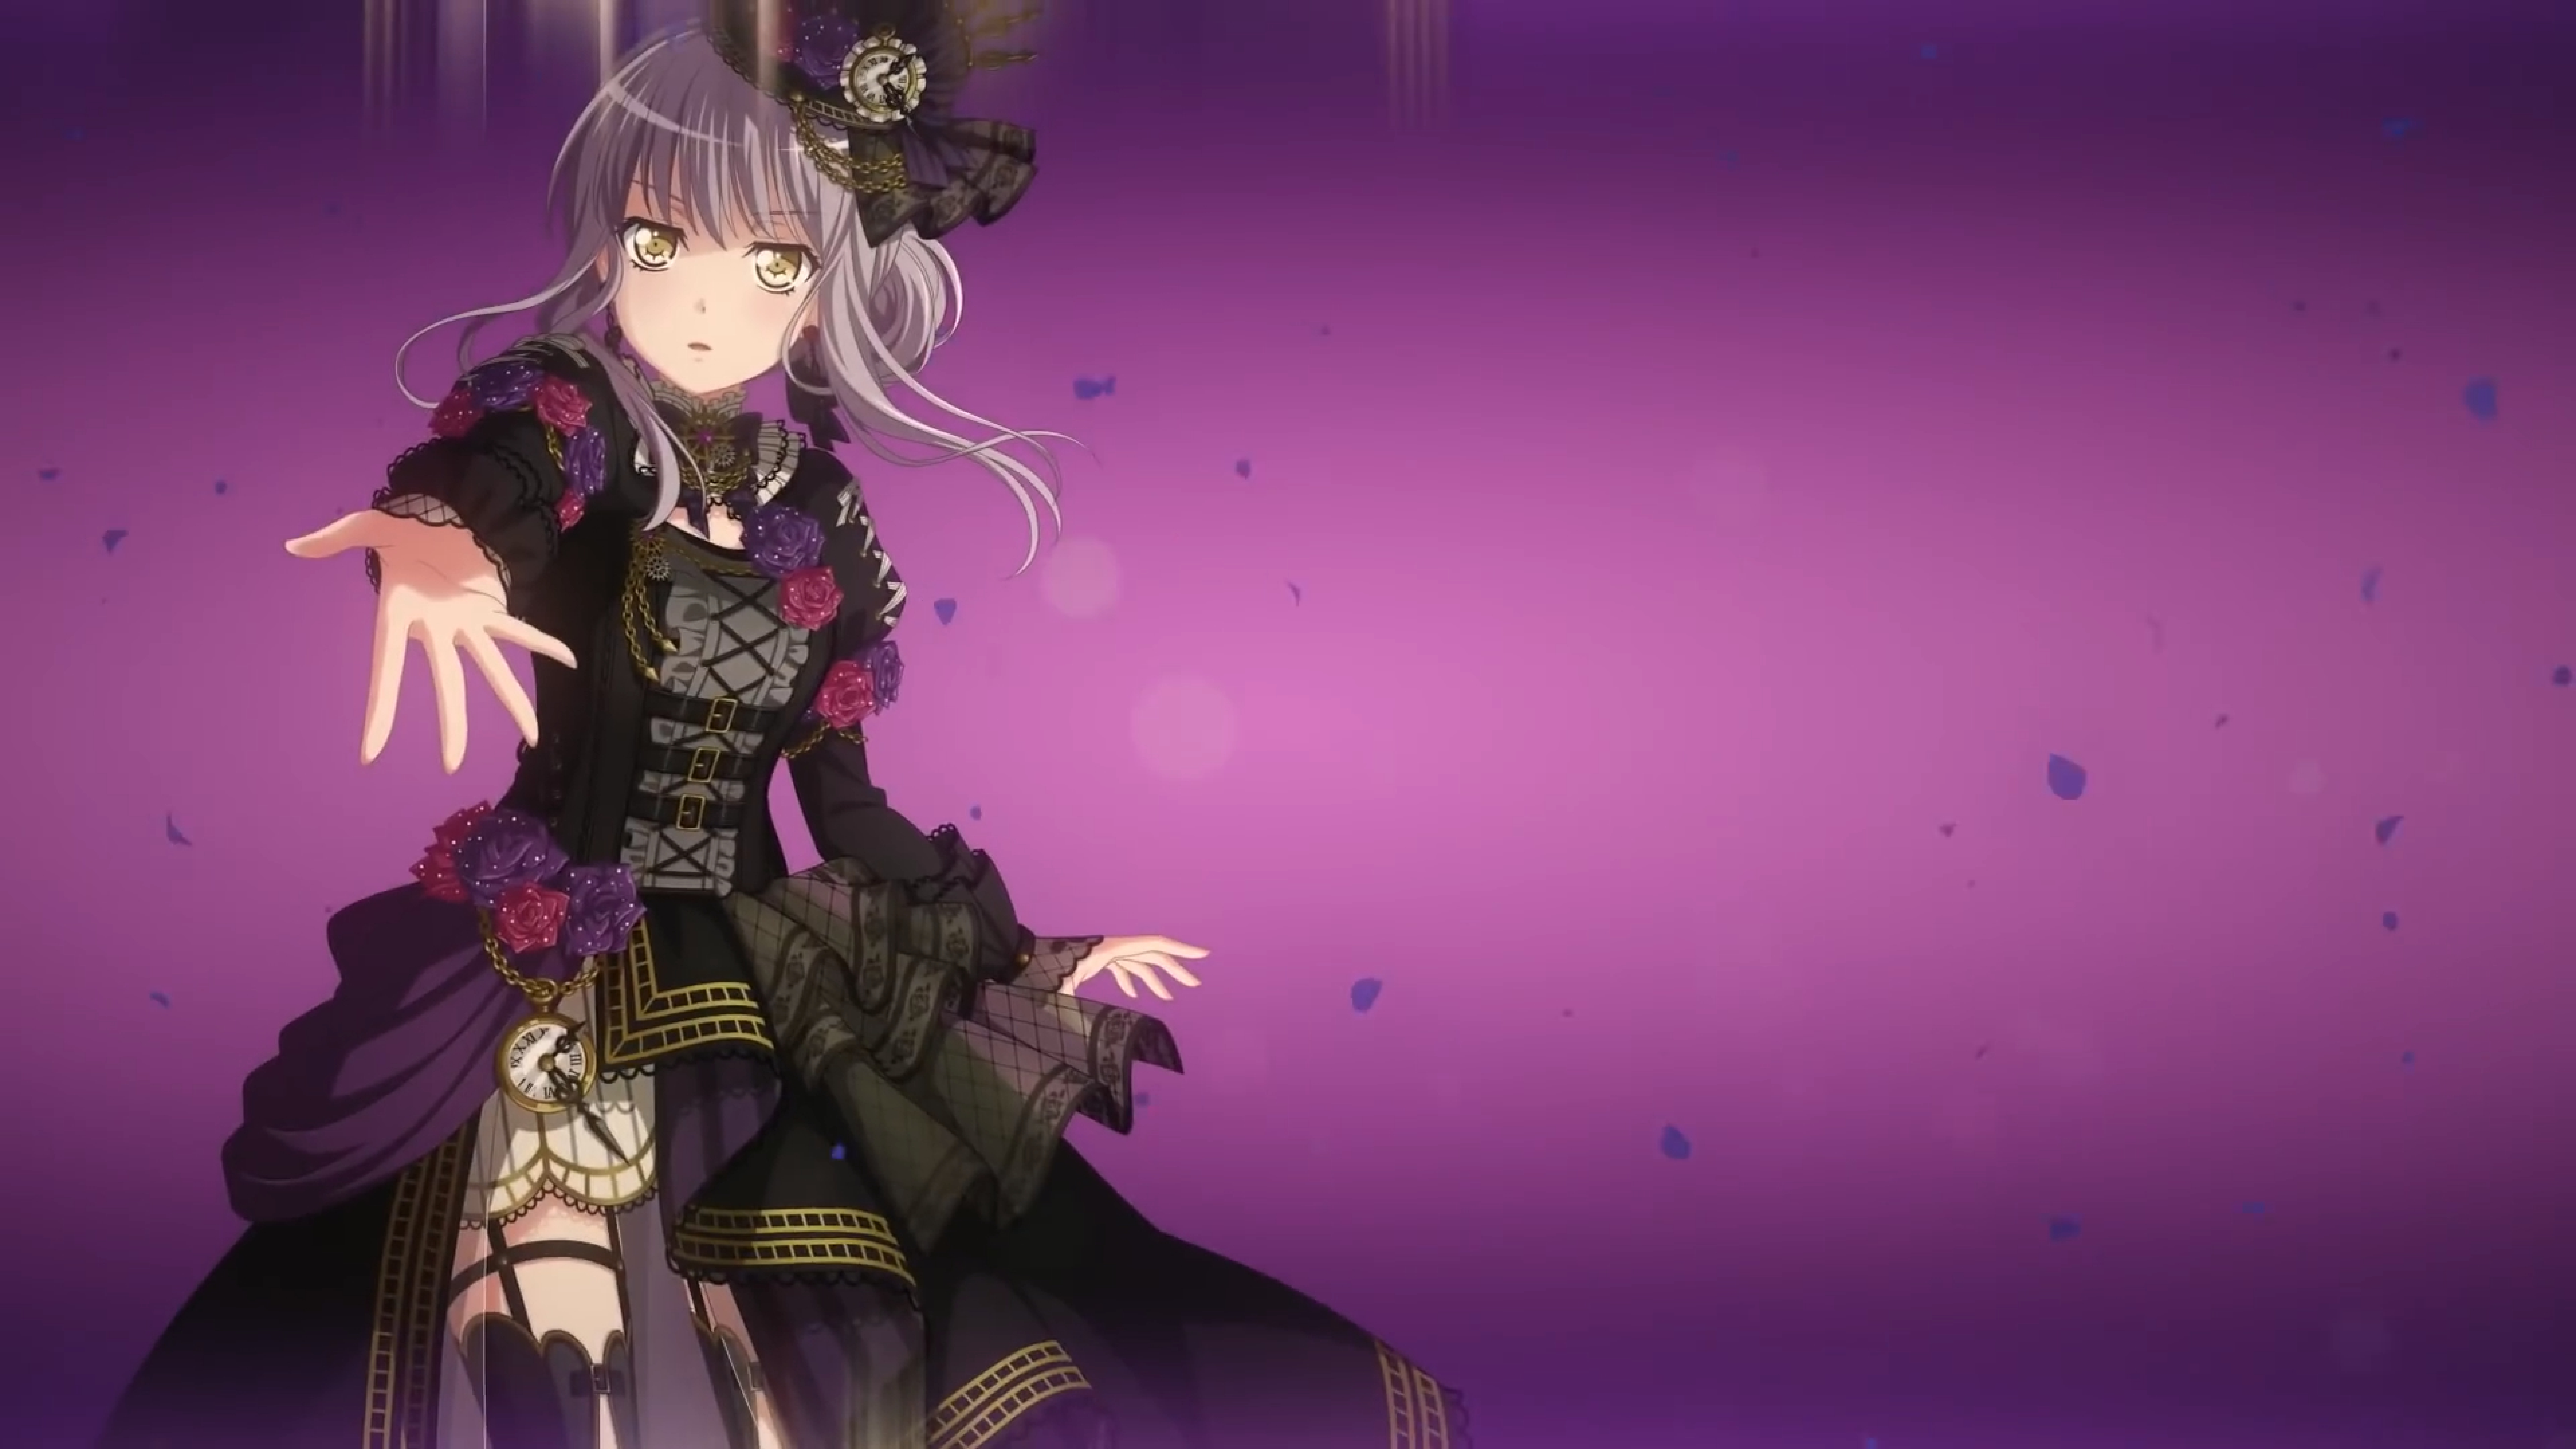 7680x43 Yukina Minato Bang Dream 8k Wallpaper Hd Anime 4k Wallpapers Images Photos And Background Wallpapers Den